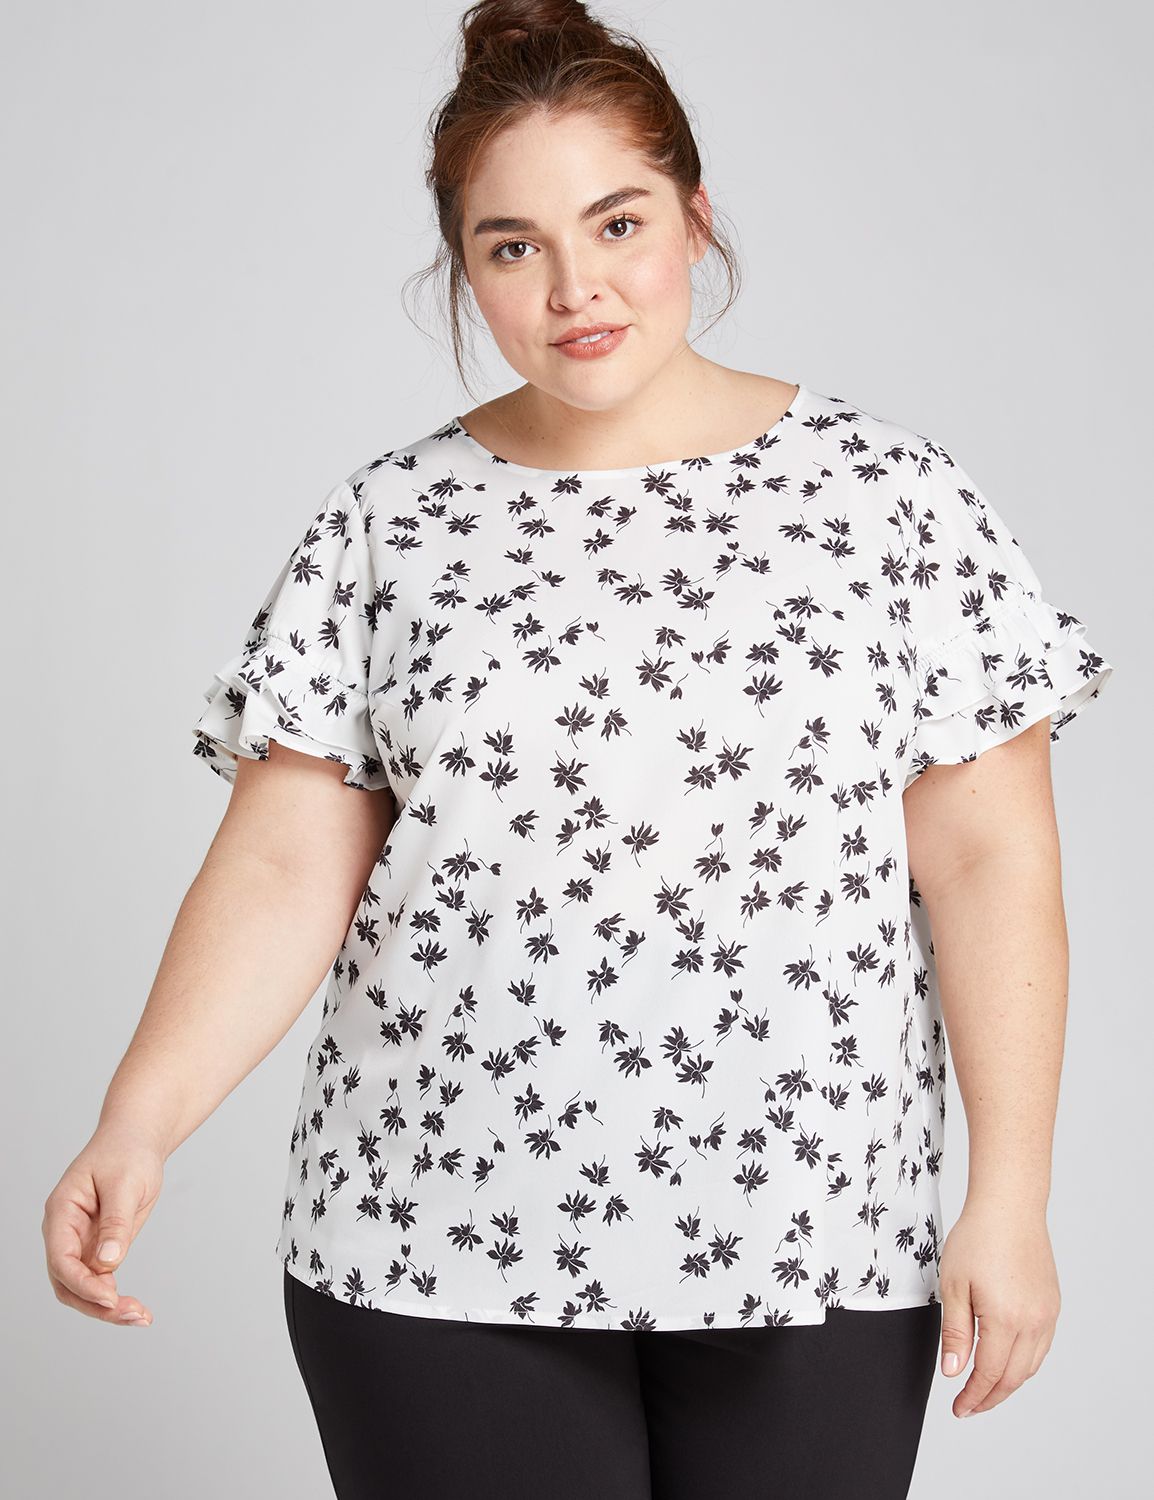 Clearance Plus Size Tops & Tees - On Sale Today | Lane Bryant